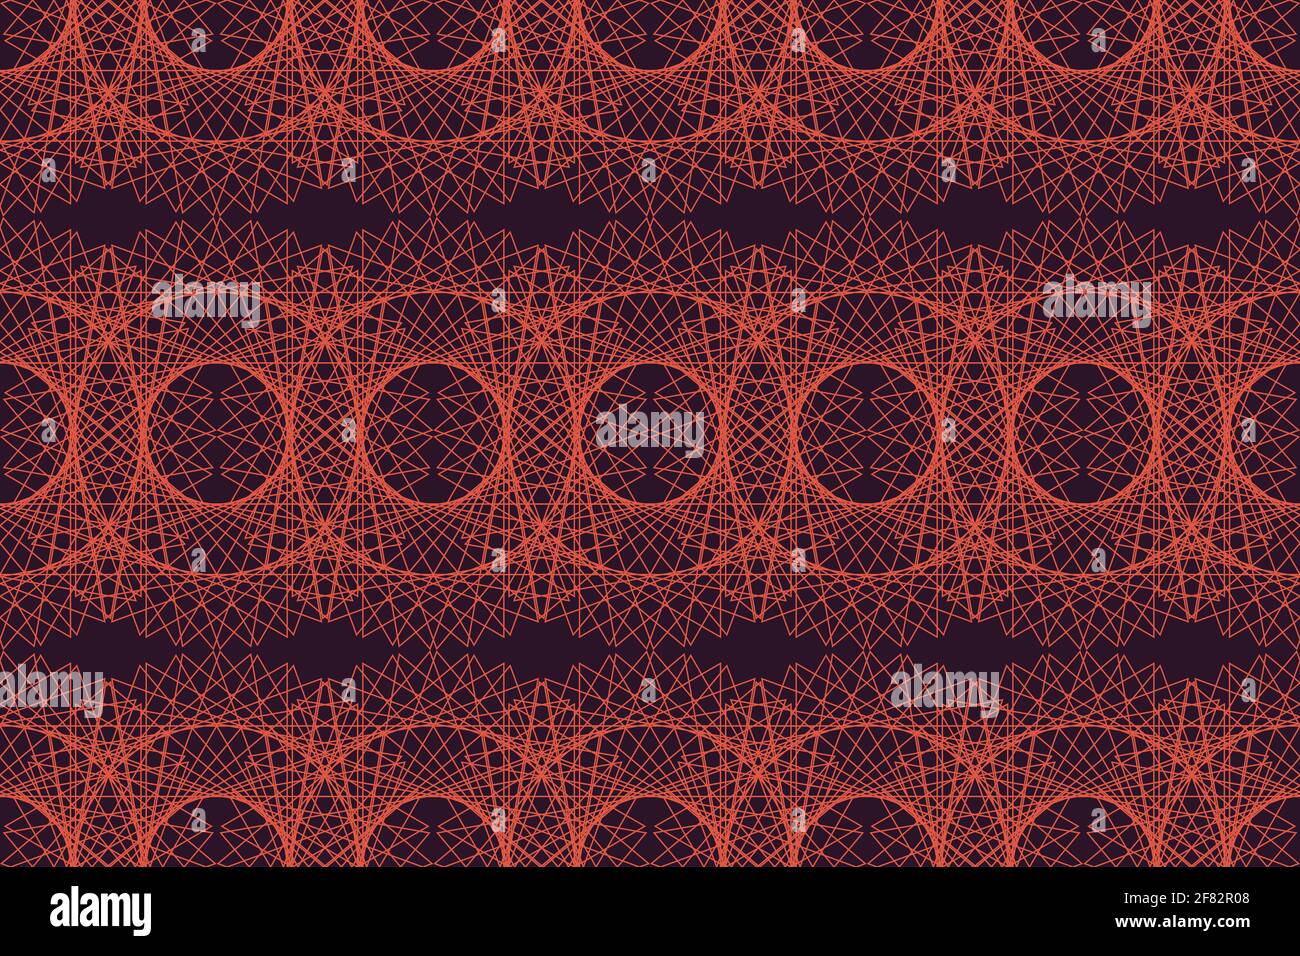 Seamless, abstract background pattern made with repetitive lines forming messy, chaotic geometric shapes. Mandala concept vector art in orange and pur Stock Photo